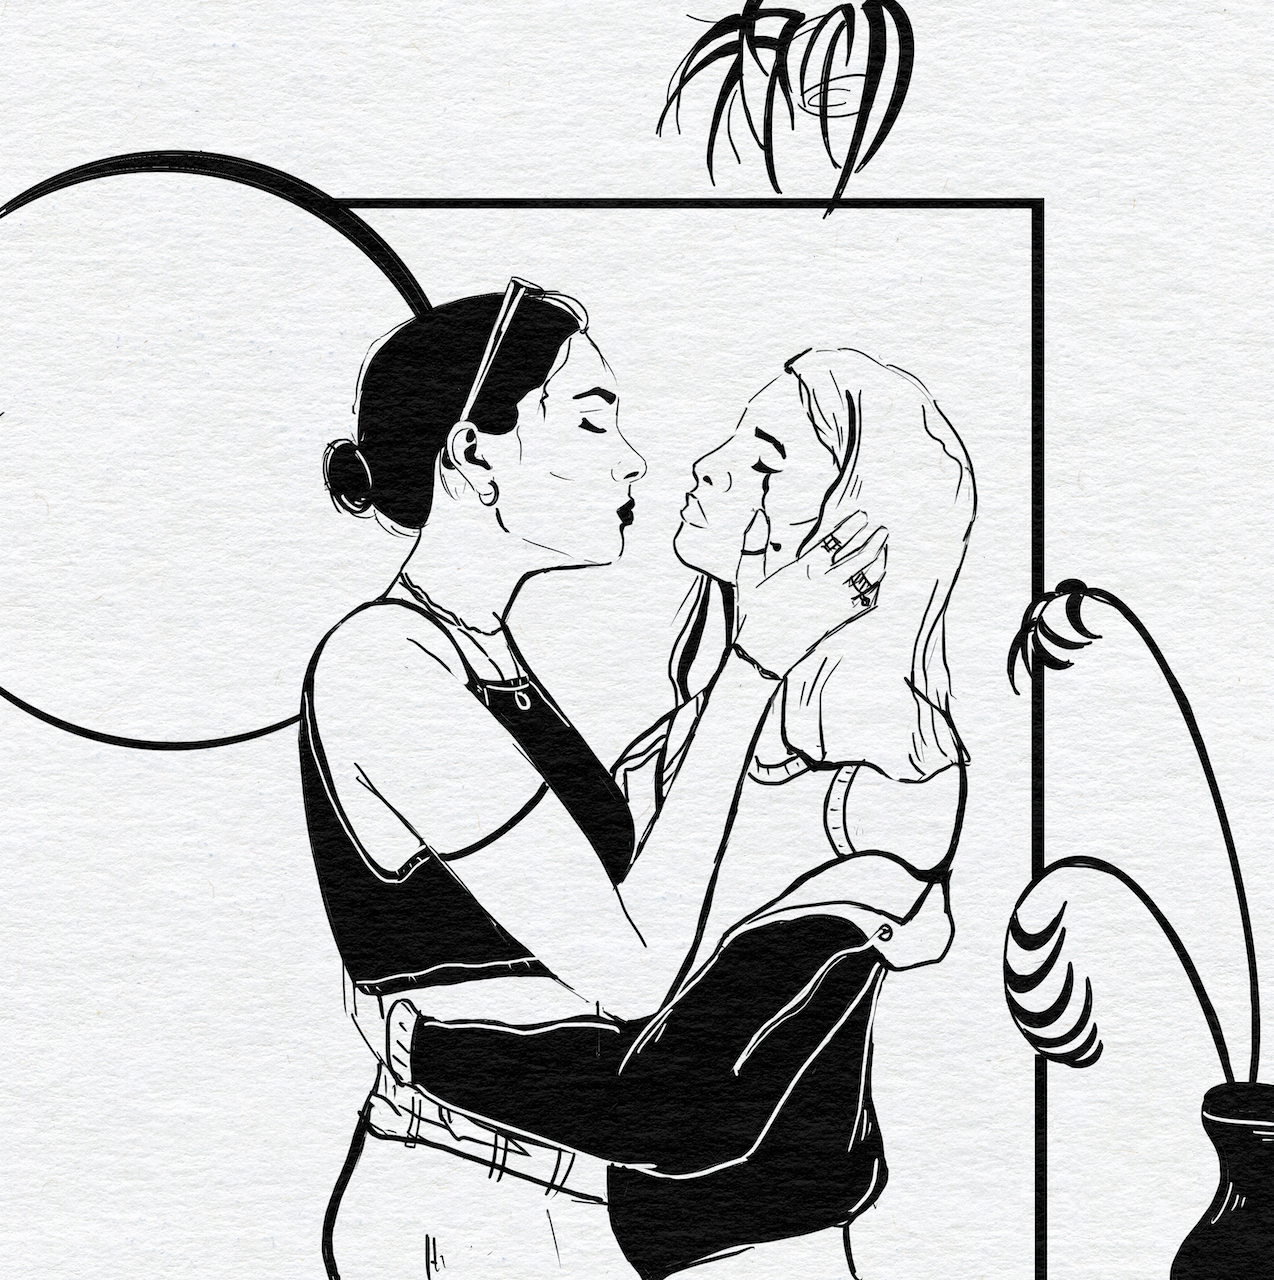 Courtney L Ellis Illustrations Art print by LGBTQ+ Illustration Artist Courtney Ellis. Wall art home decor and gifts. Lesbian couple holding each other comforting one another whilst the other is crying art piece. black and white art